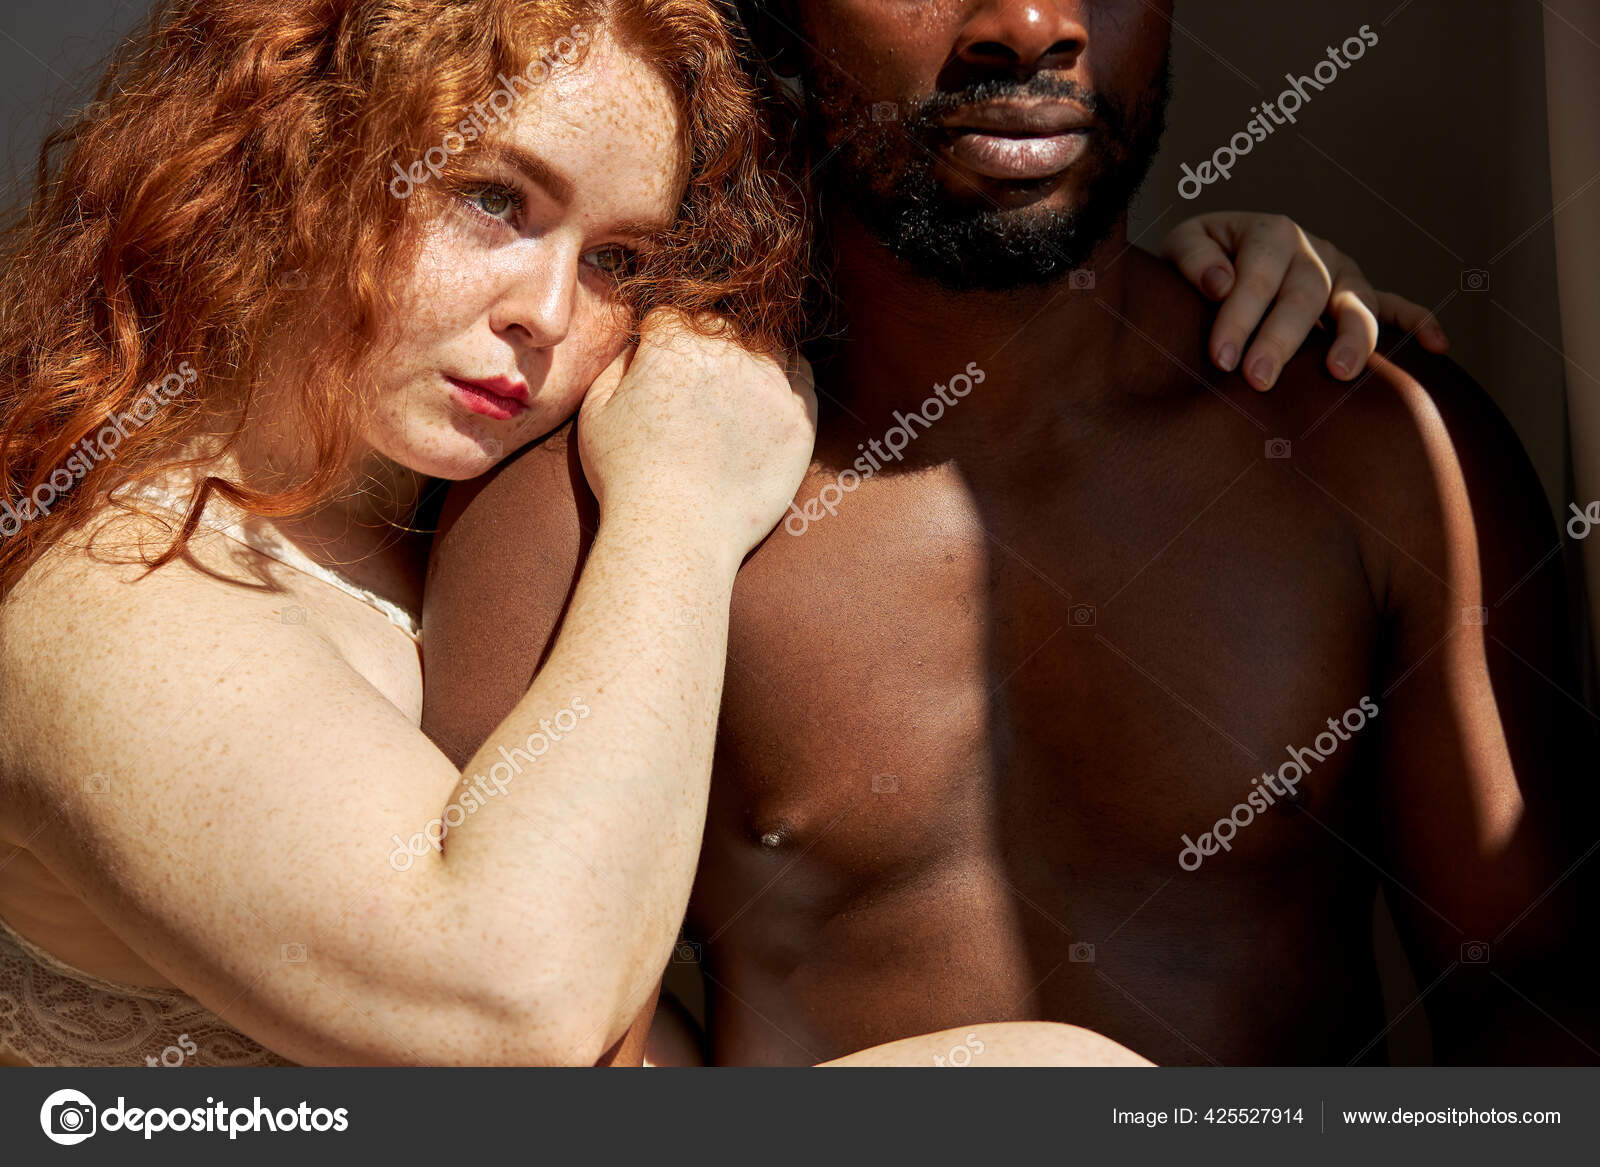 interracial wife redhead lover pictures Porn Pics Hd